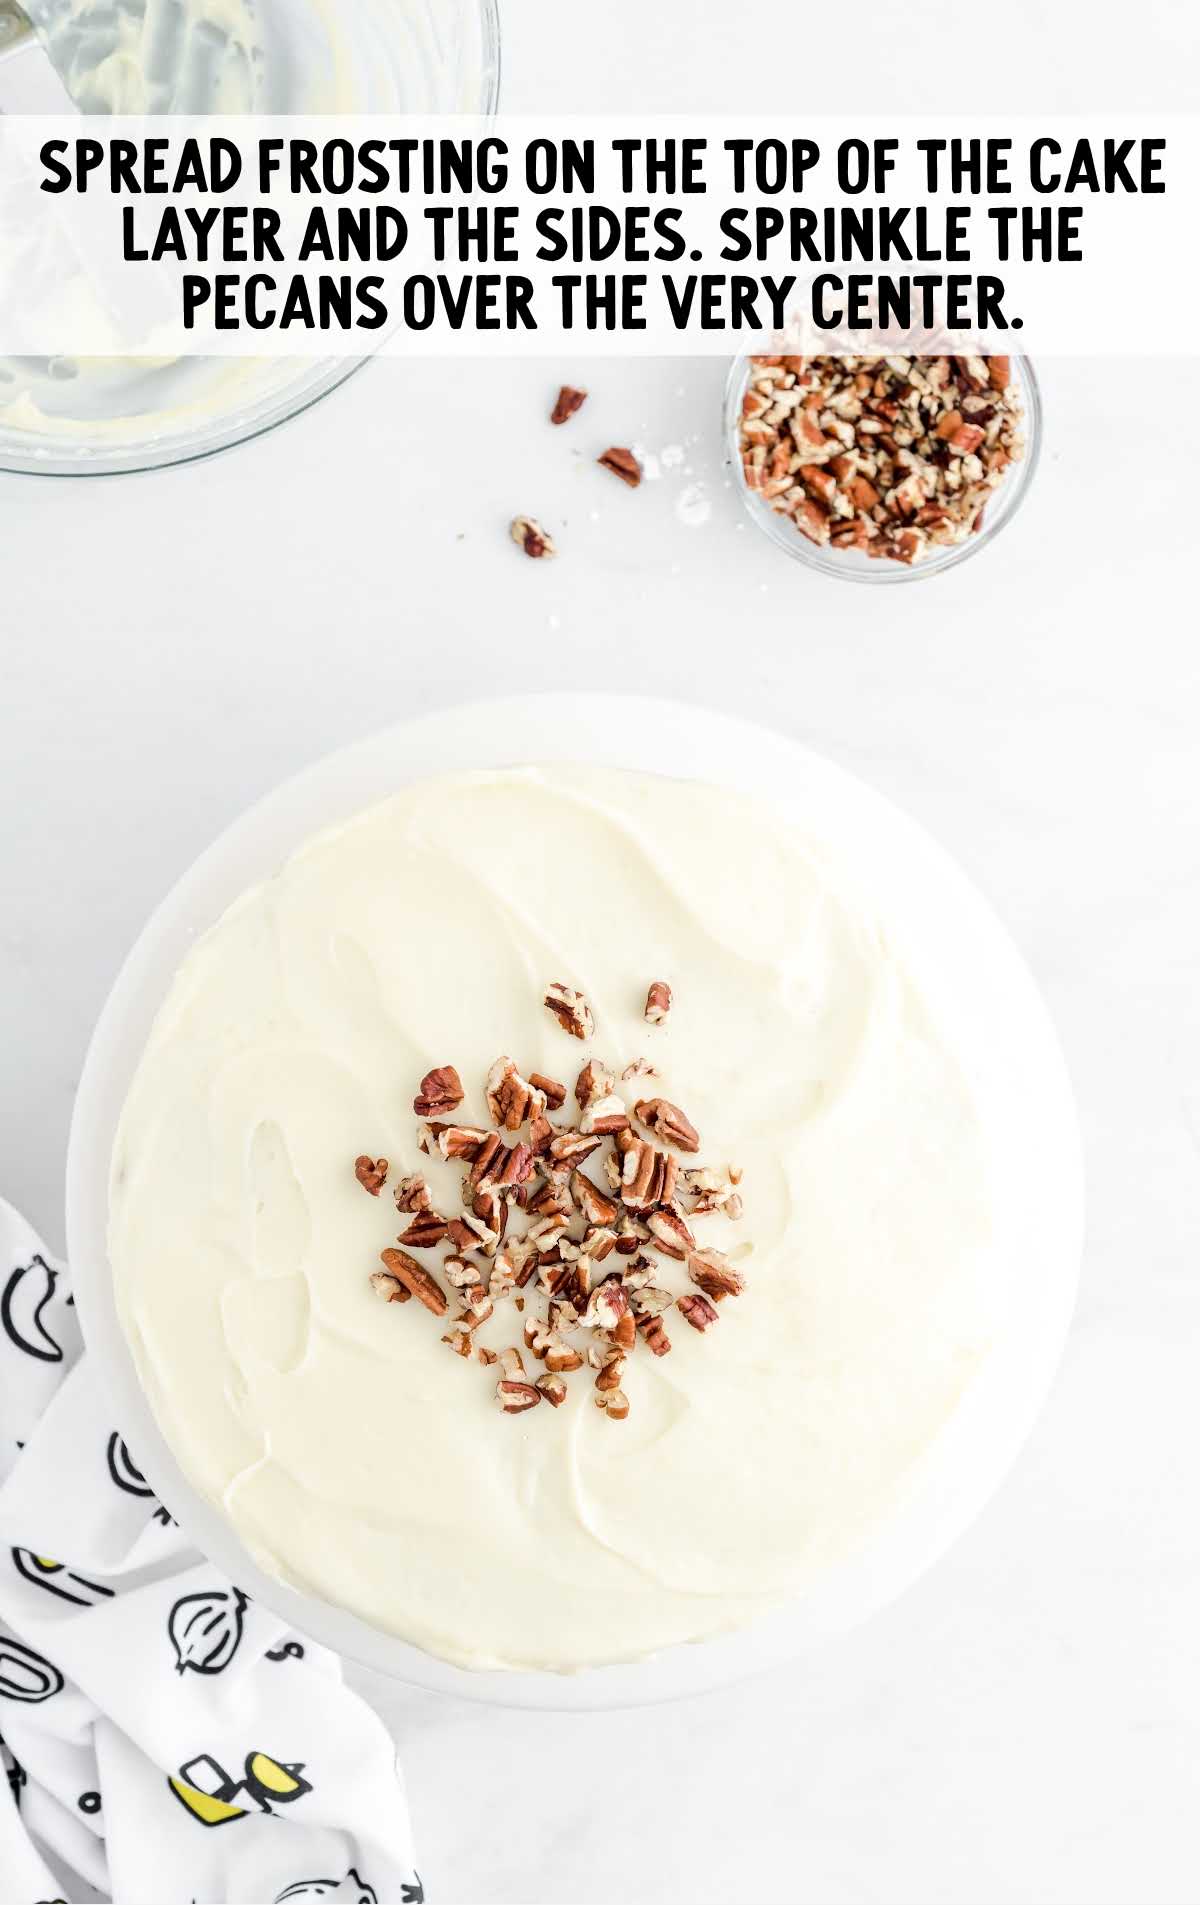 cake frosted and sprinkled with pecans